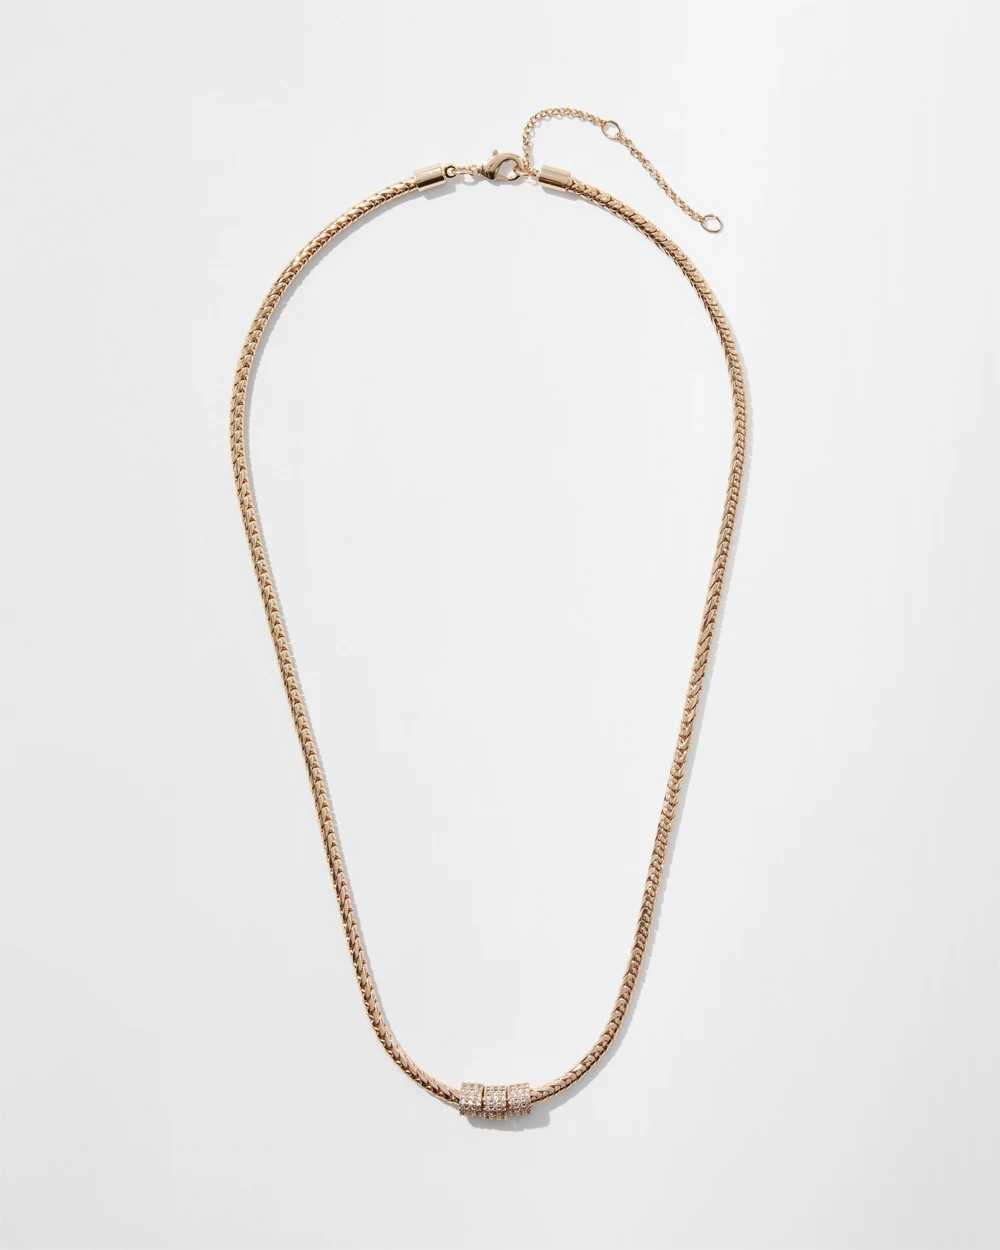 Gold Chain Pave Ring Necklace click to view larger image.